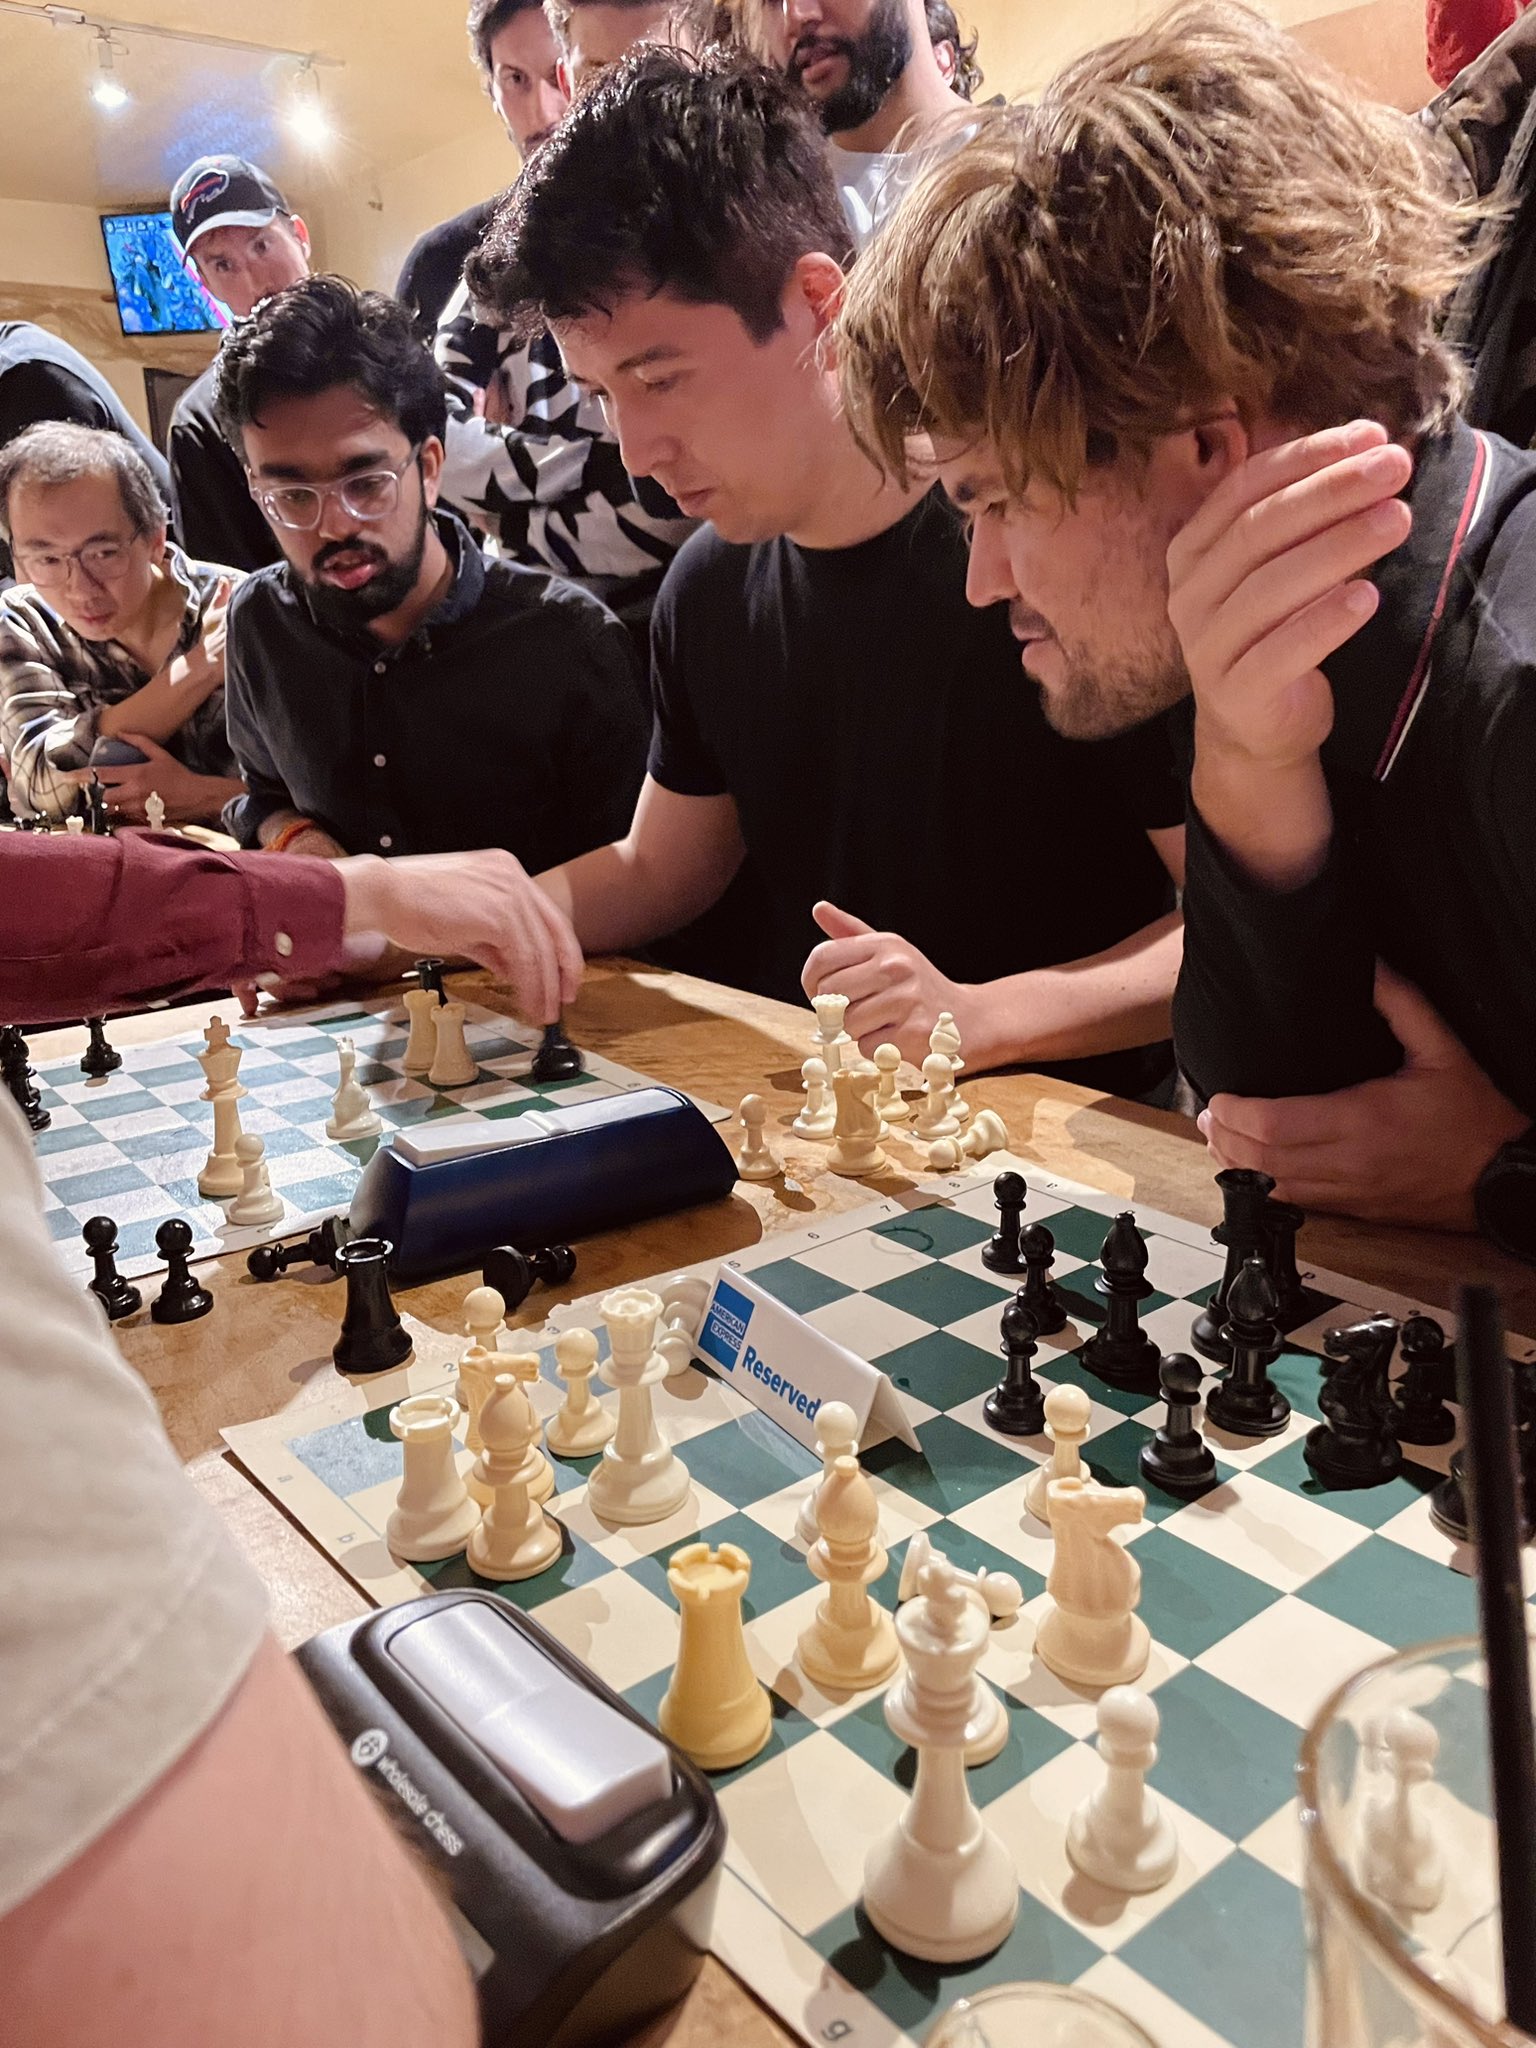 pov: you just blundered against GothamChess